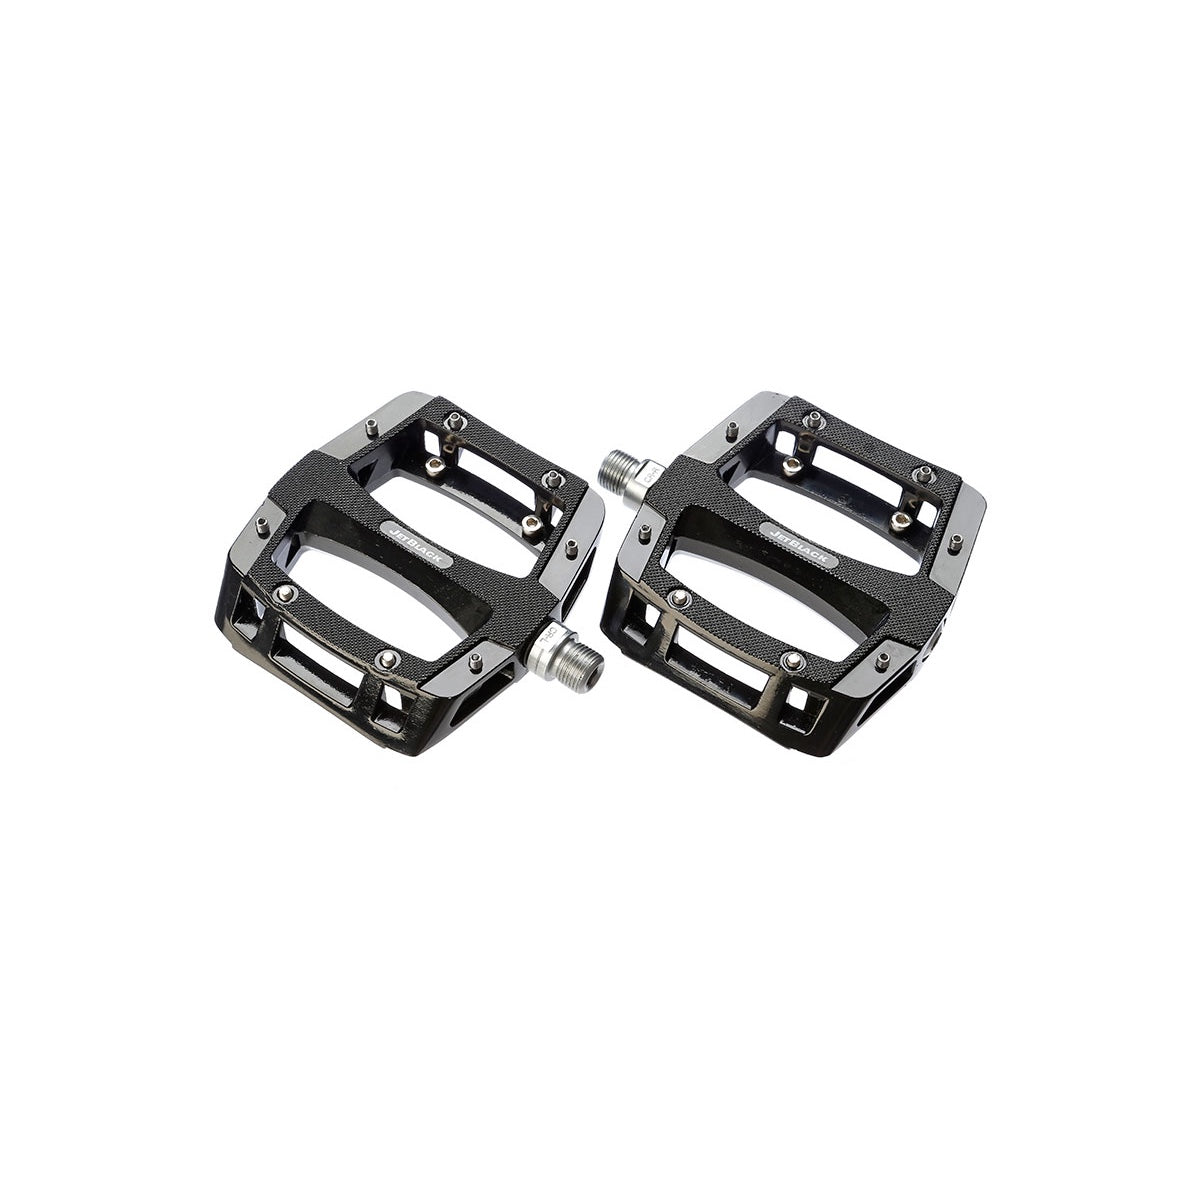 JetBlack Flat Out Pro Alloy MTB Pedals - Sealed Bearings, Cromo Axle